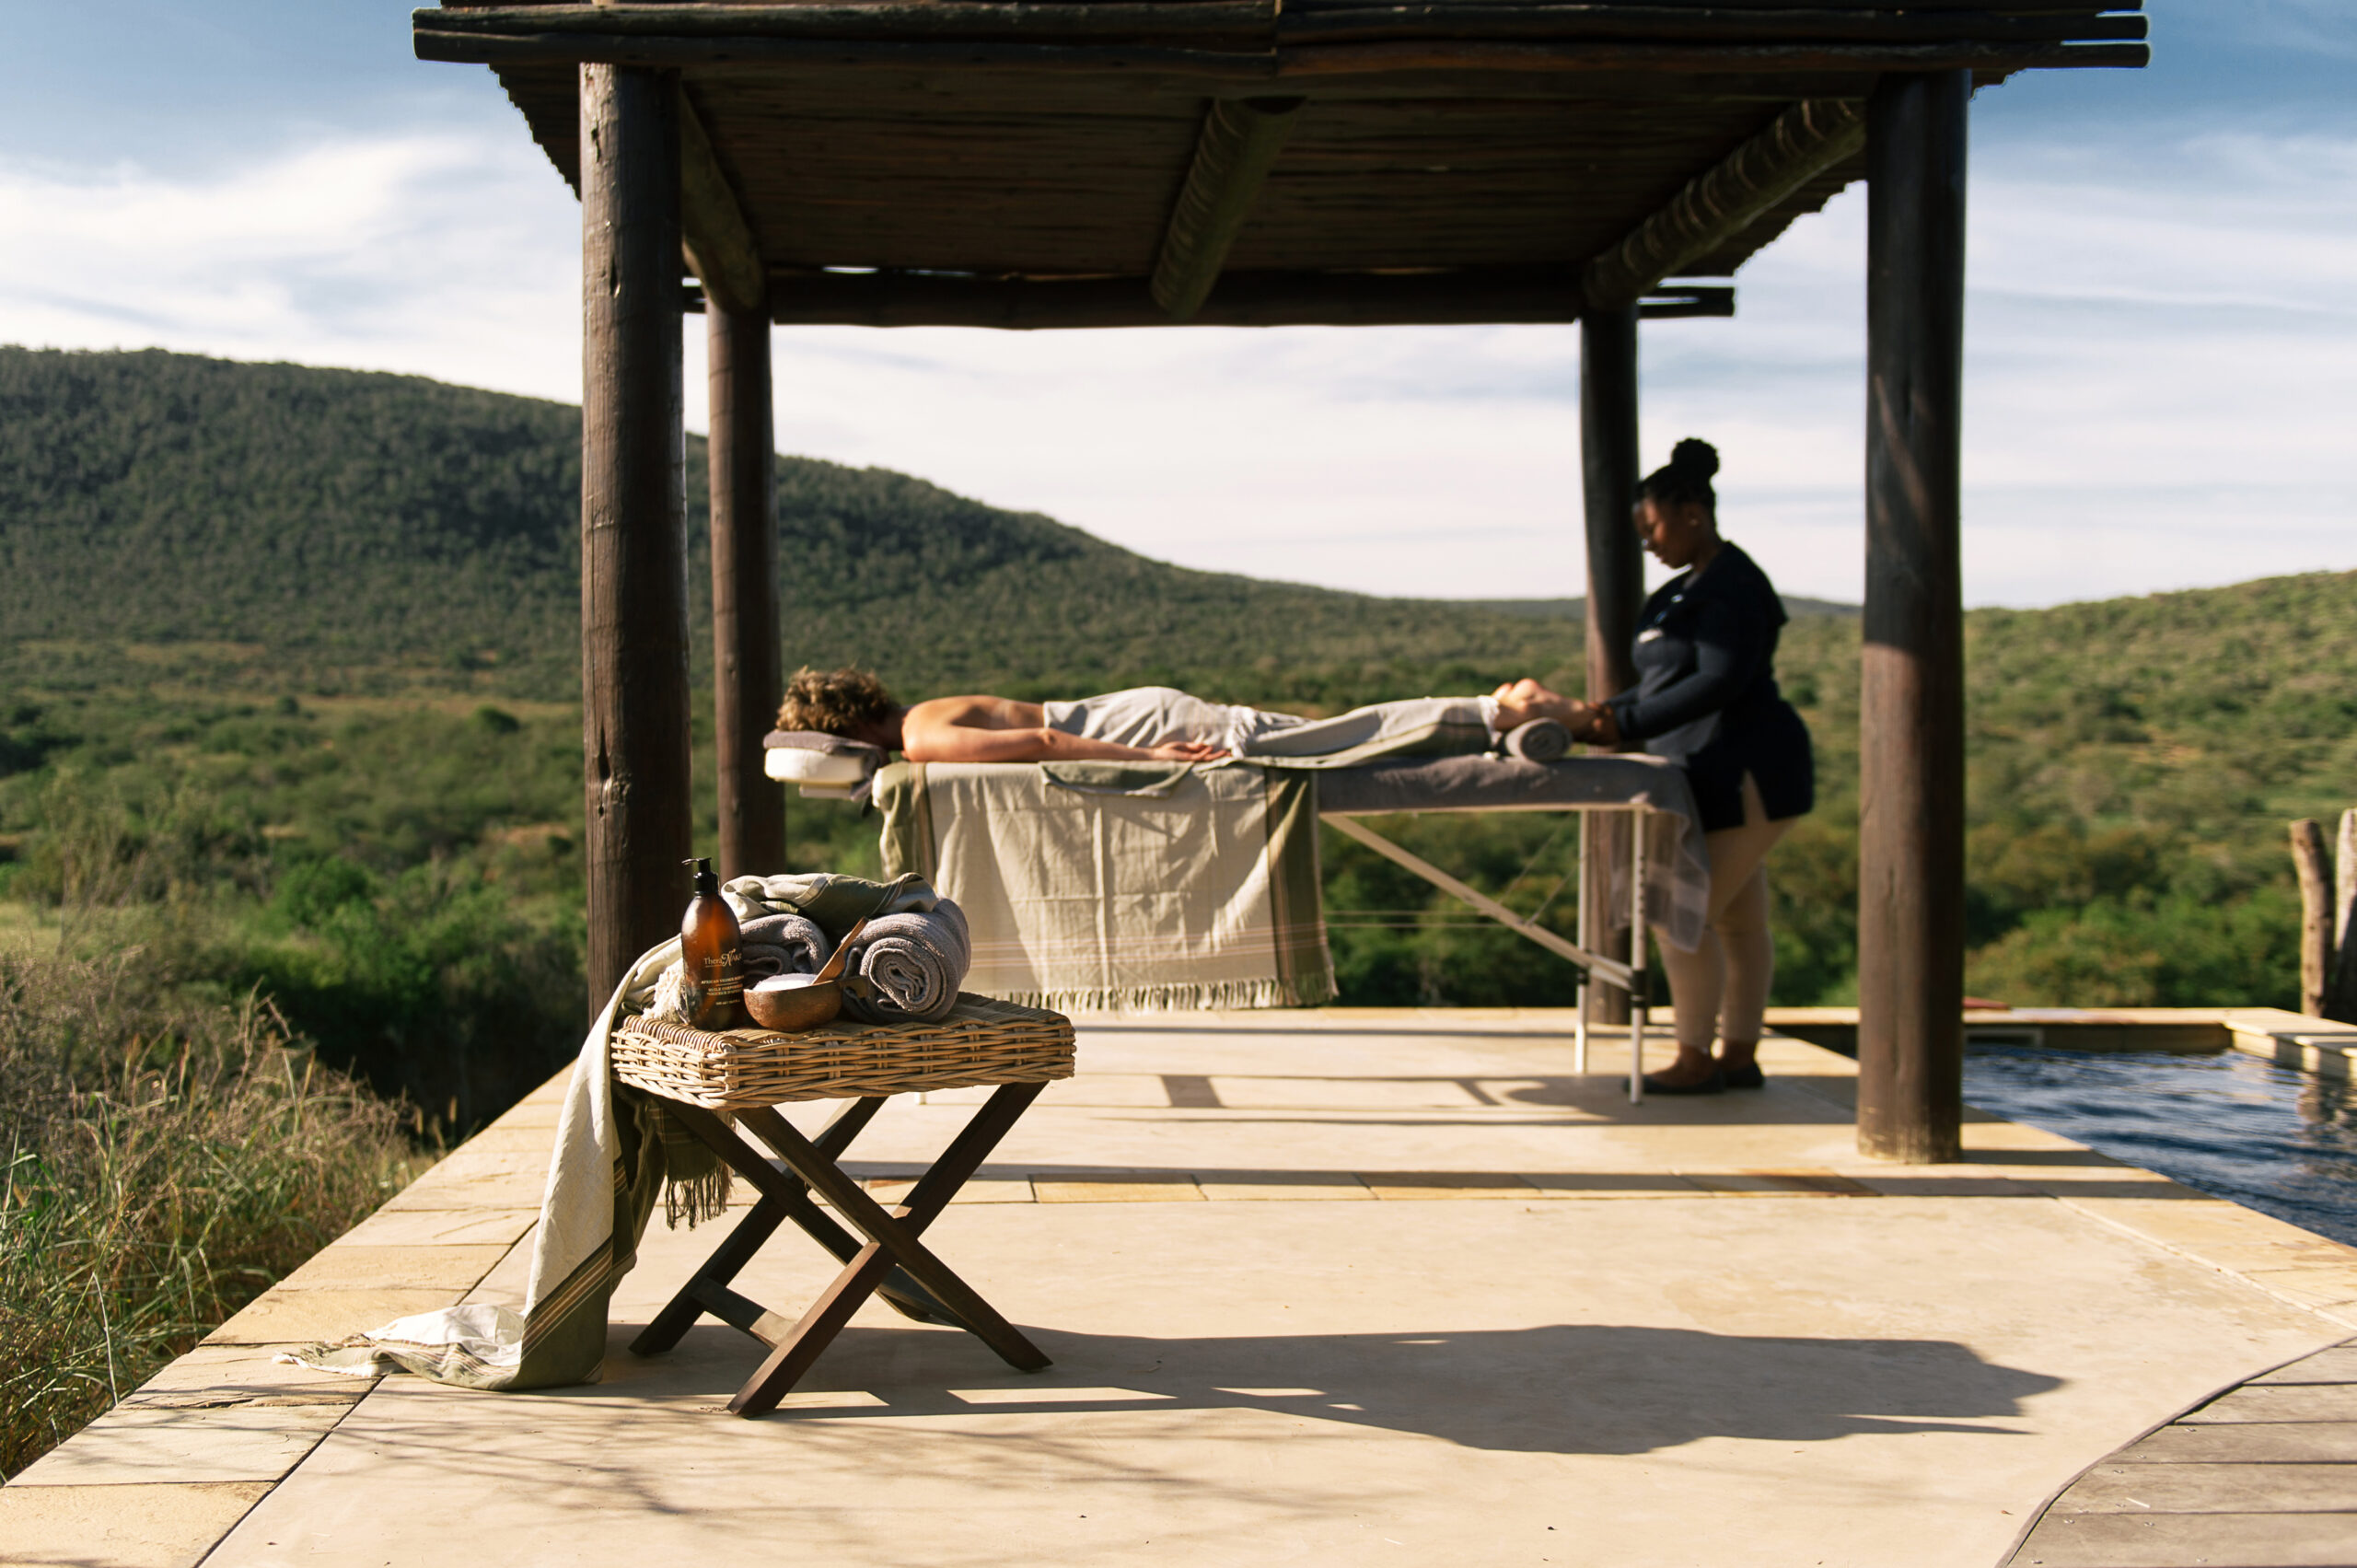 Kwandwe Private Game Reserve – South Africa